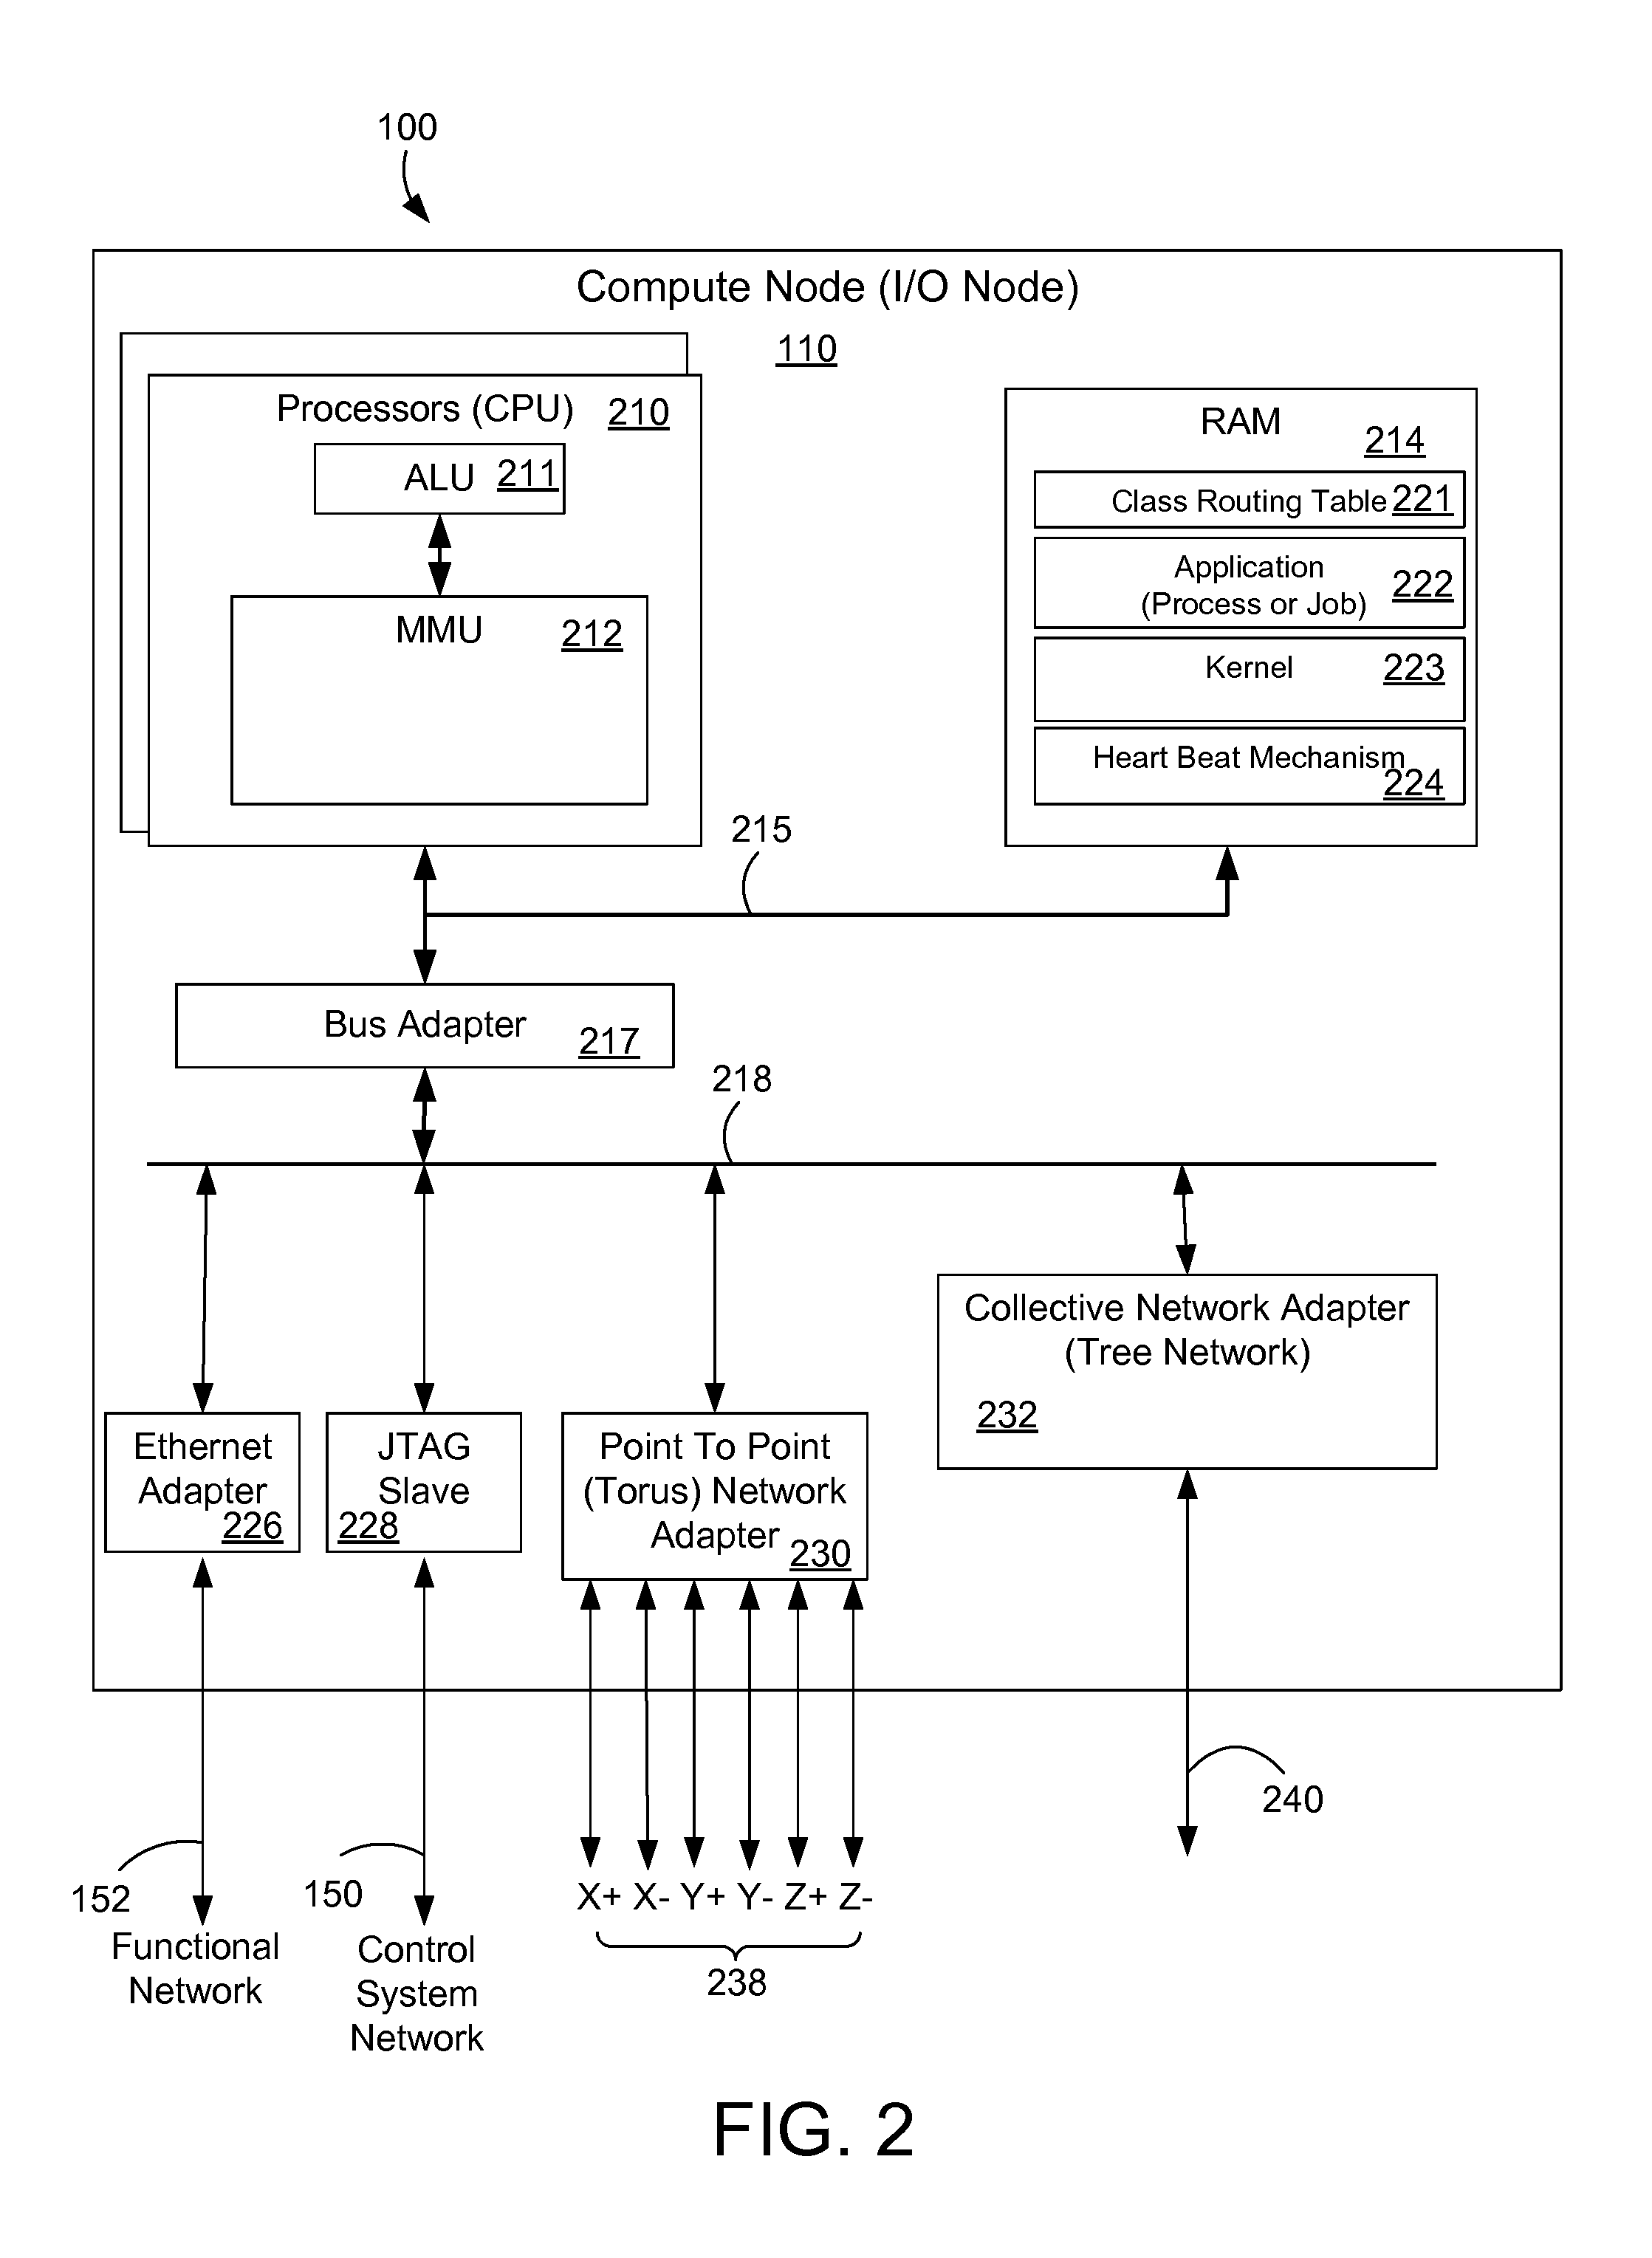 Optimizing Power Consumption and Performance in a Hybrid Computer Evironment